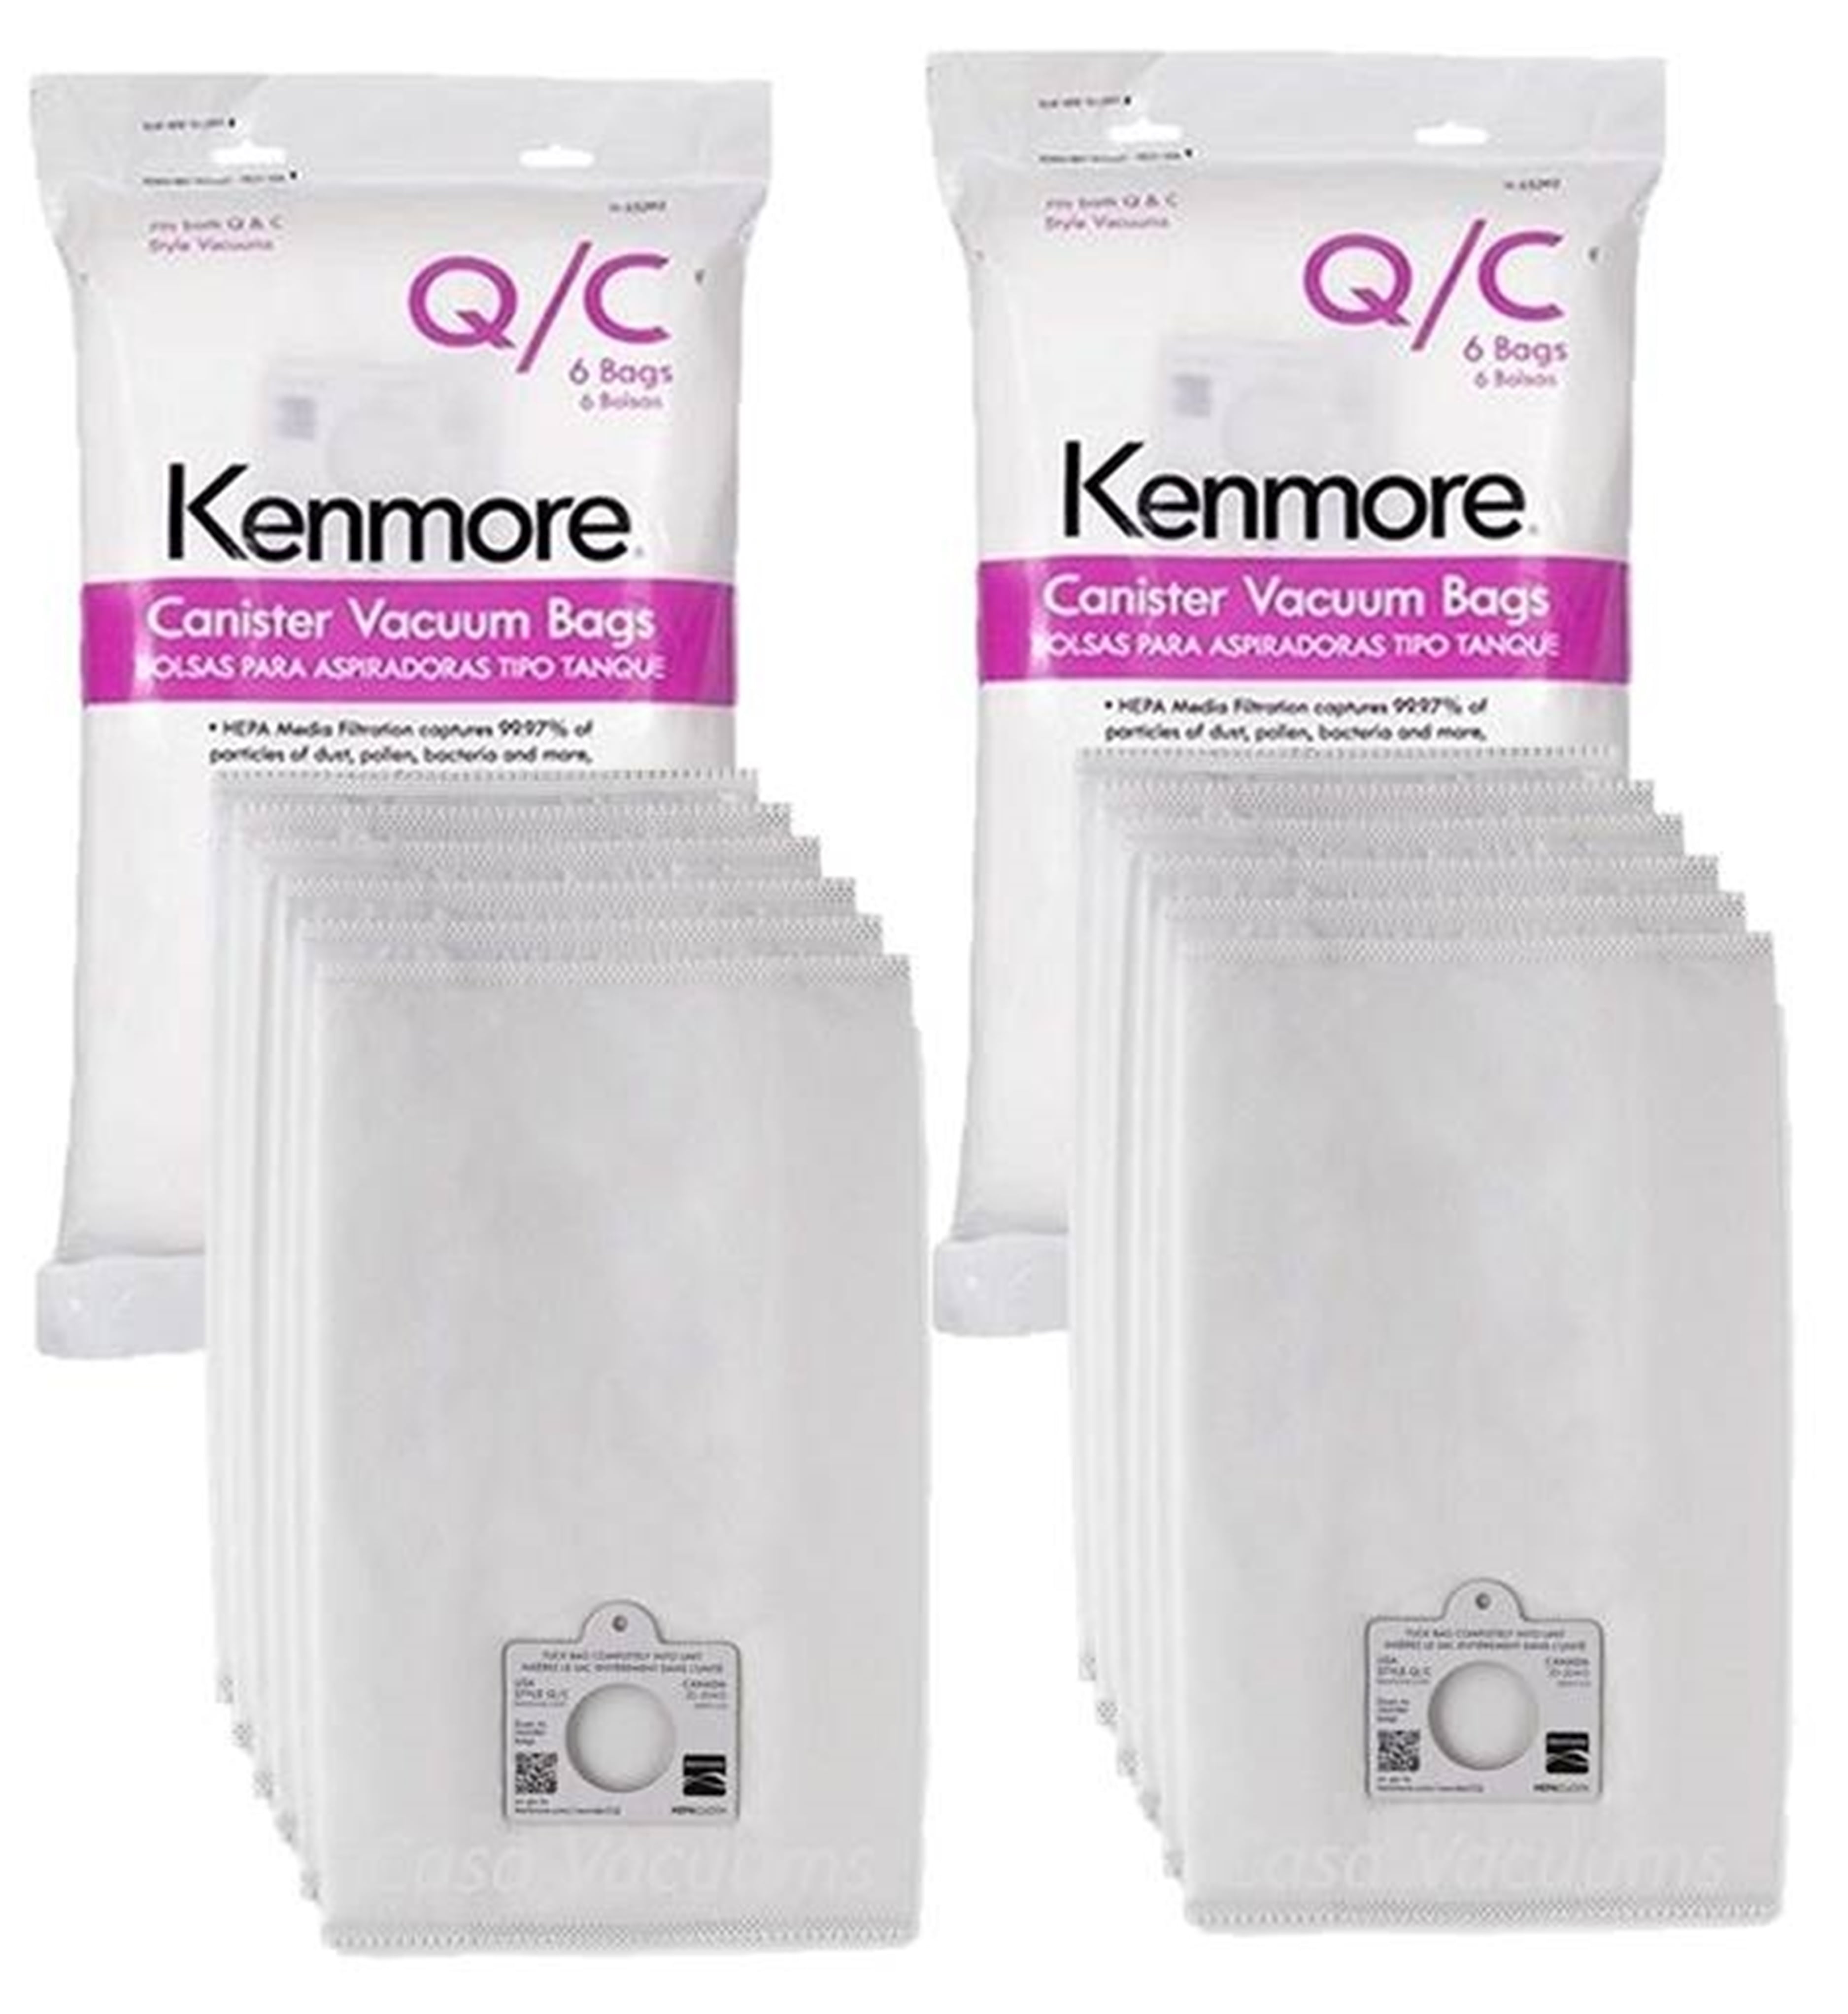 12 UltraCare Vac Bags For Kenmore C Vacuum Also Fits Kenmore Type Q Canisters 